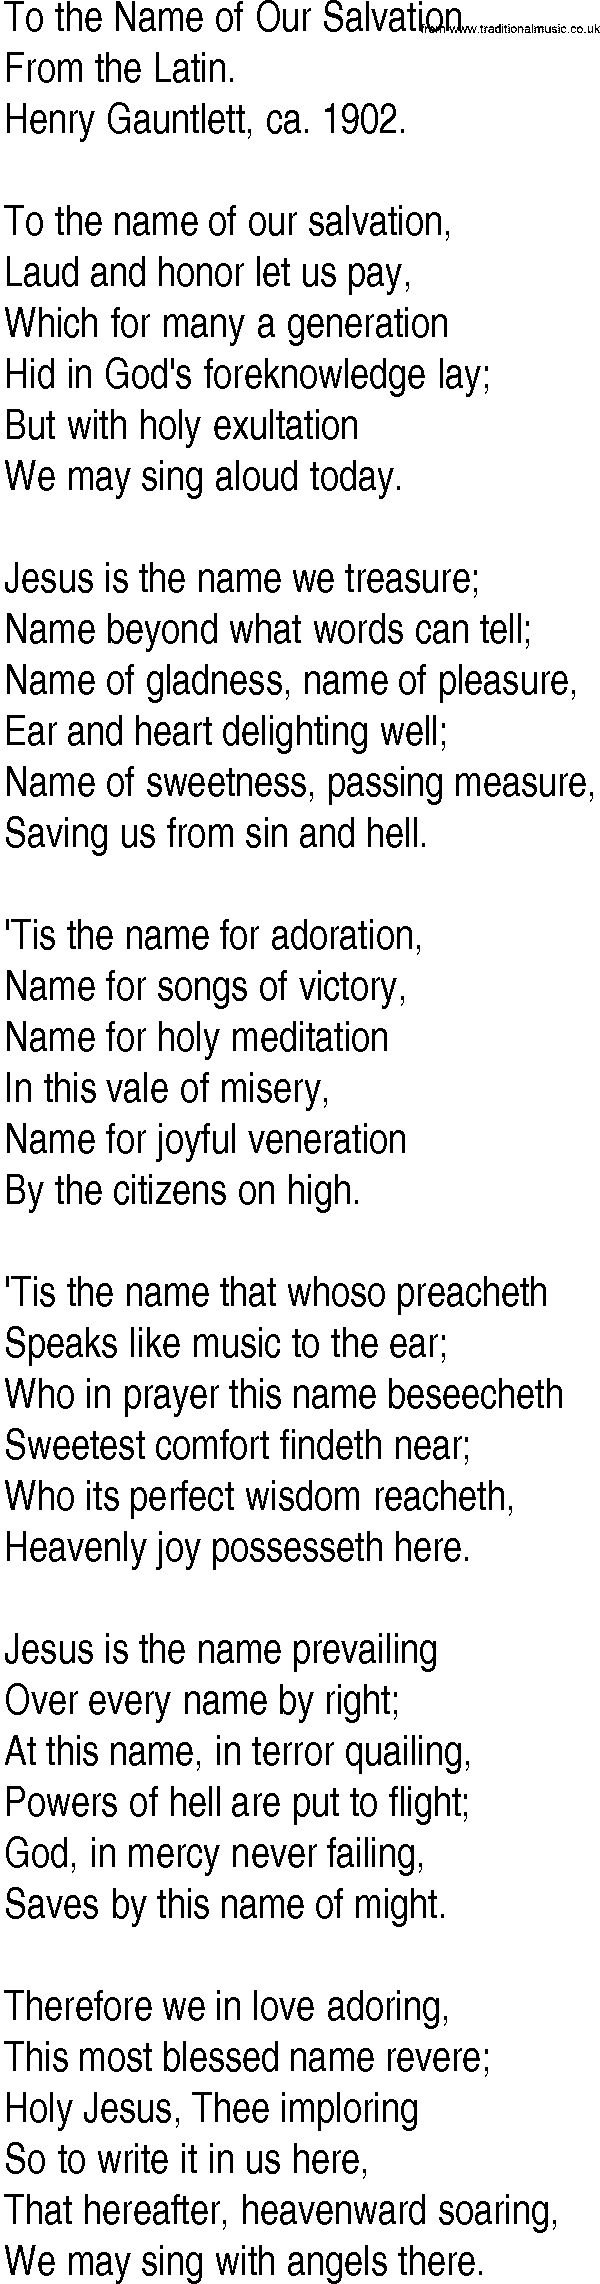 Hymn and Gospel Song: To the Name of Our Salvation by From the Latin lyrics